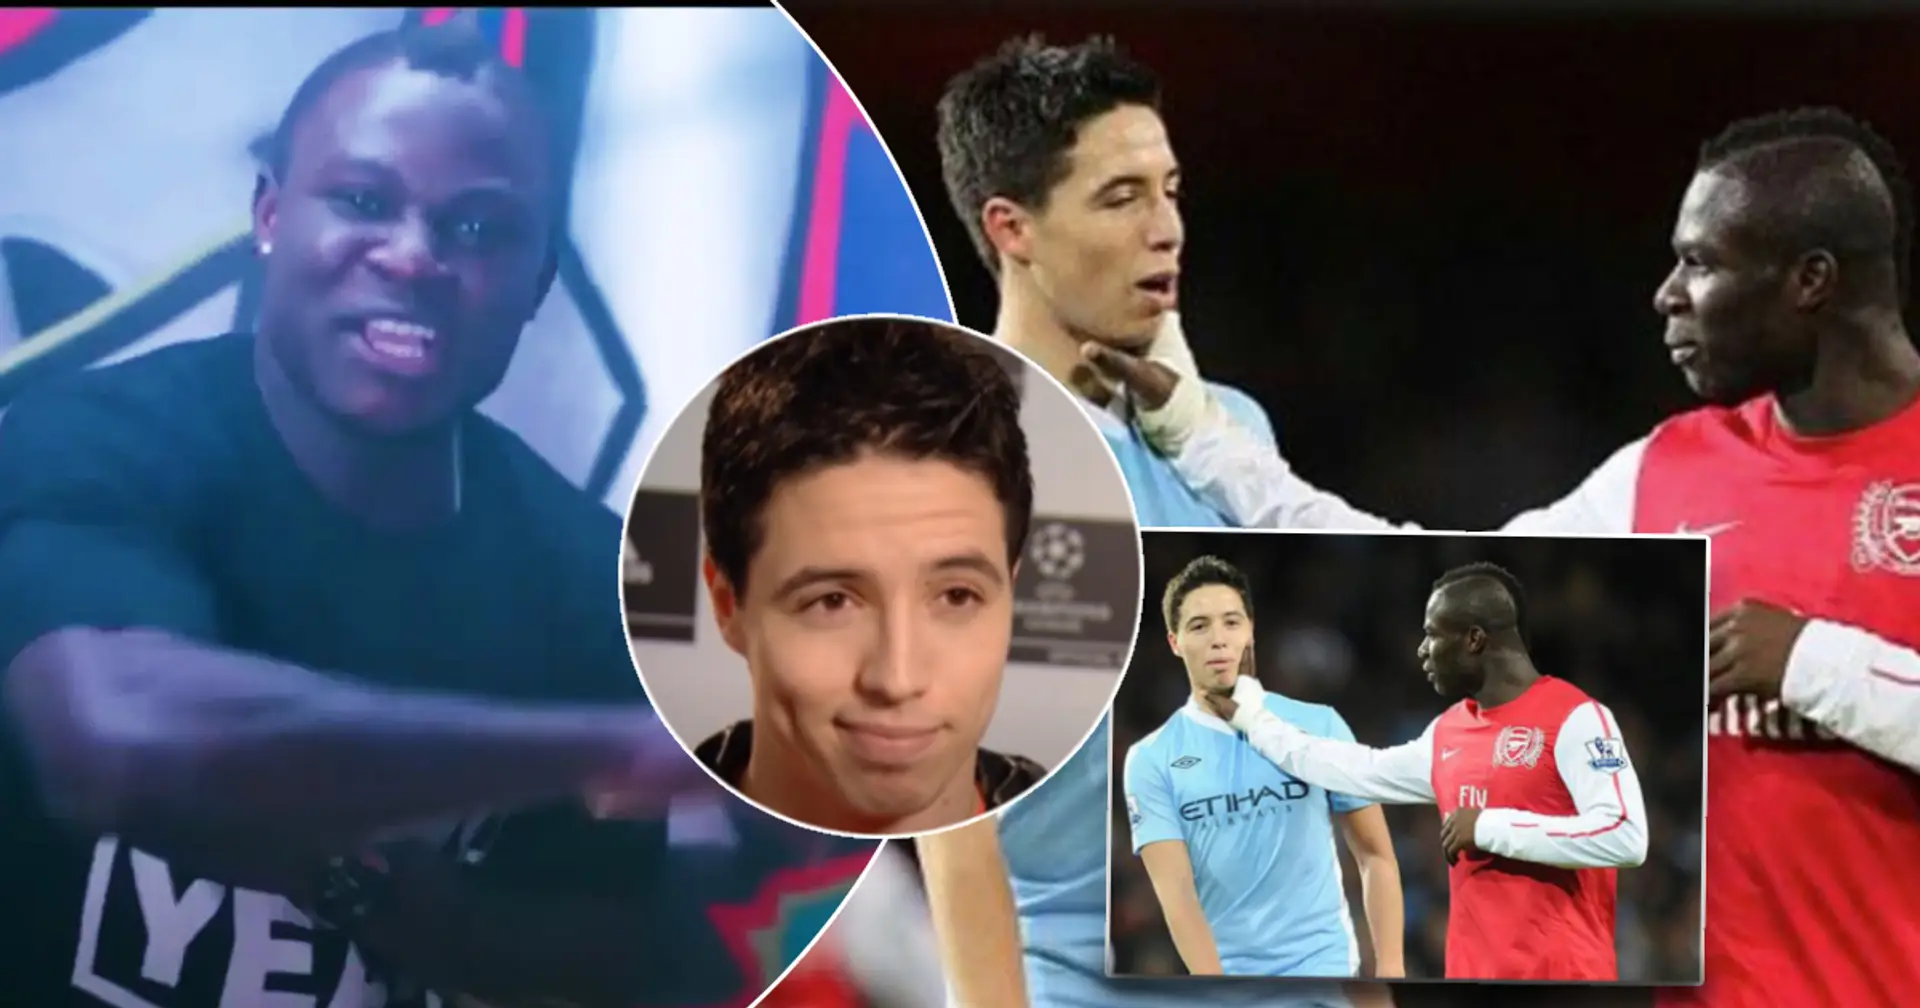 'If he gives me billions dollars, I will still not like him'. What happened between Samir Nasri and Emmanuel Frimpong